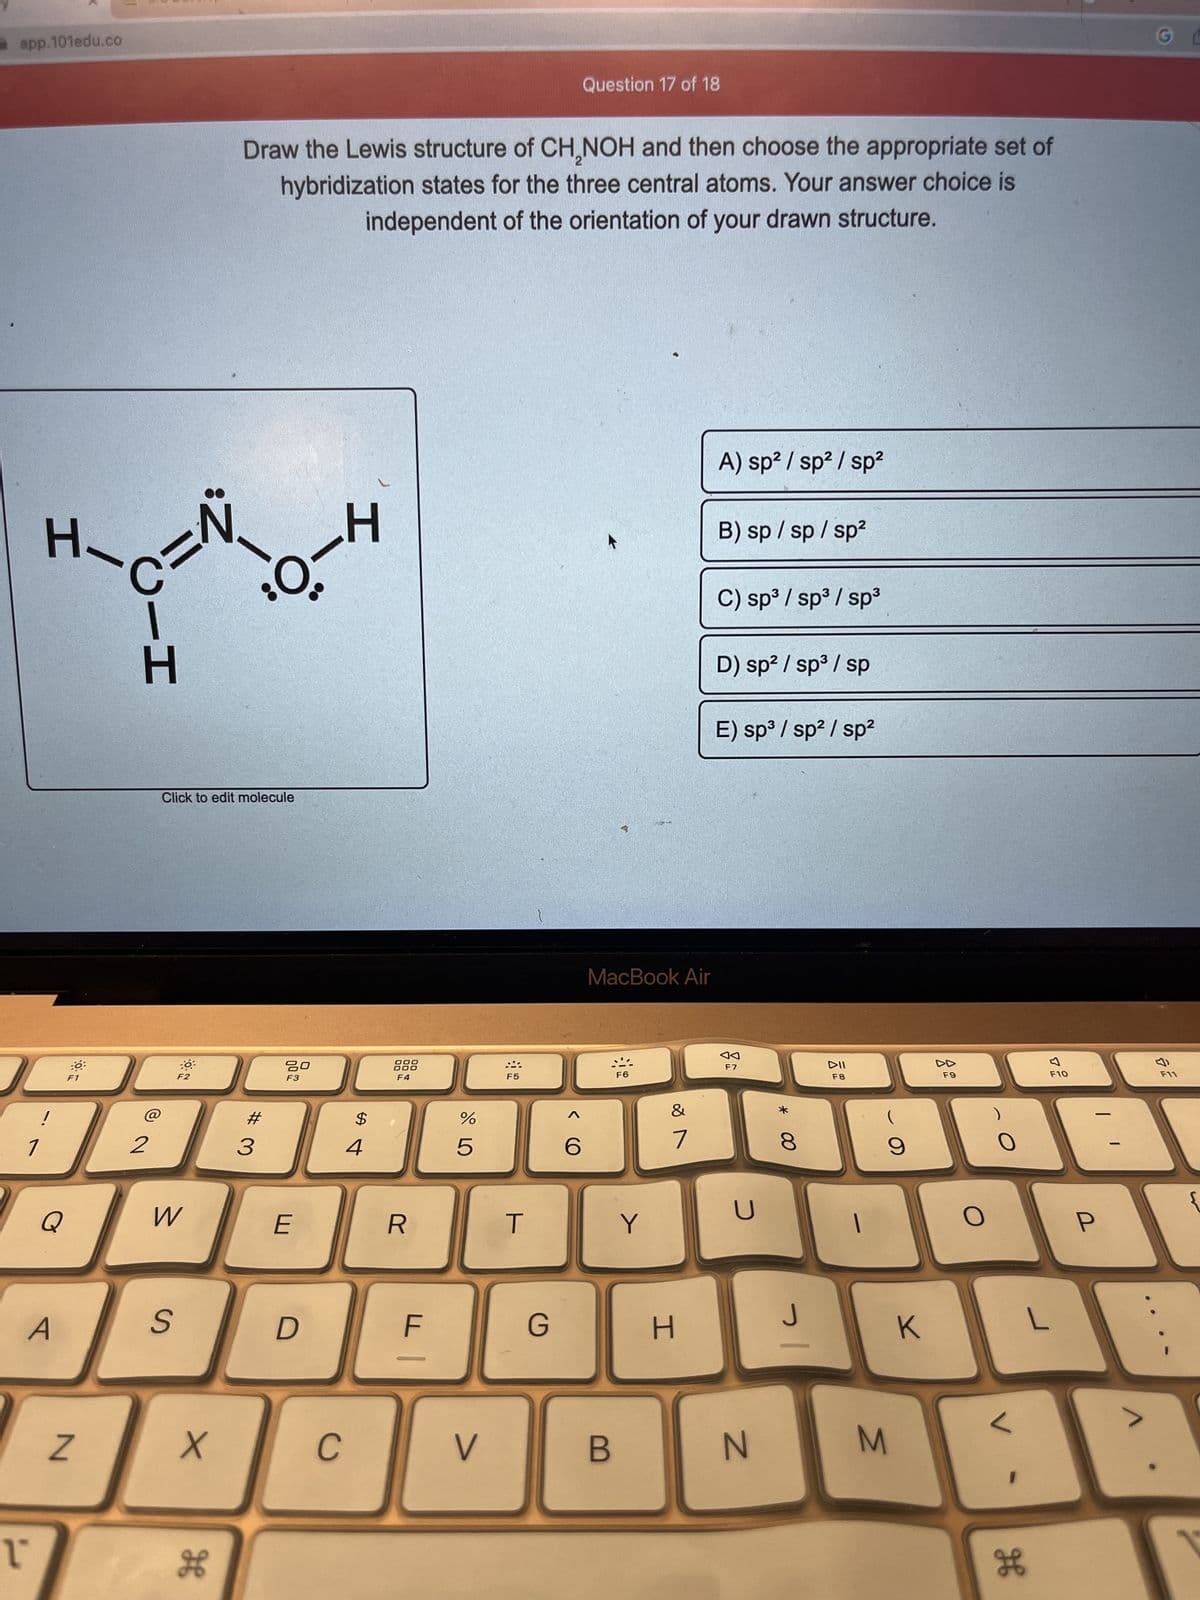 app.101edu.co
1
ľª
H-
!
Q
A
C=N
N
2
Click to edit molecule
F2
W
S
X
H
Draw the Lewis structure of CH,NOH and then choose the appropriate set of
hybridization states for the three central atoms. Your answer choice is
independent of the orientation of your drawn structure.
³0-4
# 3
80
F3
E
D
C
H
4
000
000
F4
R
F
JO LO
%
5
V
F5
T
G
<CO
Question 17 of 18
6
MacBook Air
B
F6
Y
&
7
H
A) sp² / sp² / sp²
B) sp /sp/sp²
C) sp³ / sp³ / sp³
D) sp² / sp³ / sp
E) sp³ / sp² / sp²
F7
U
N
00 *
8
J
기
DII
F8
(
9
M
K
F9
O
0
H
F10
L
P
G L